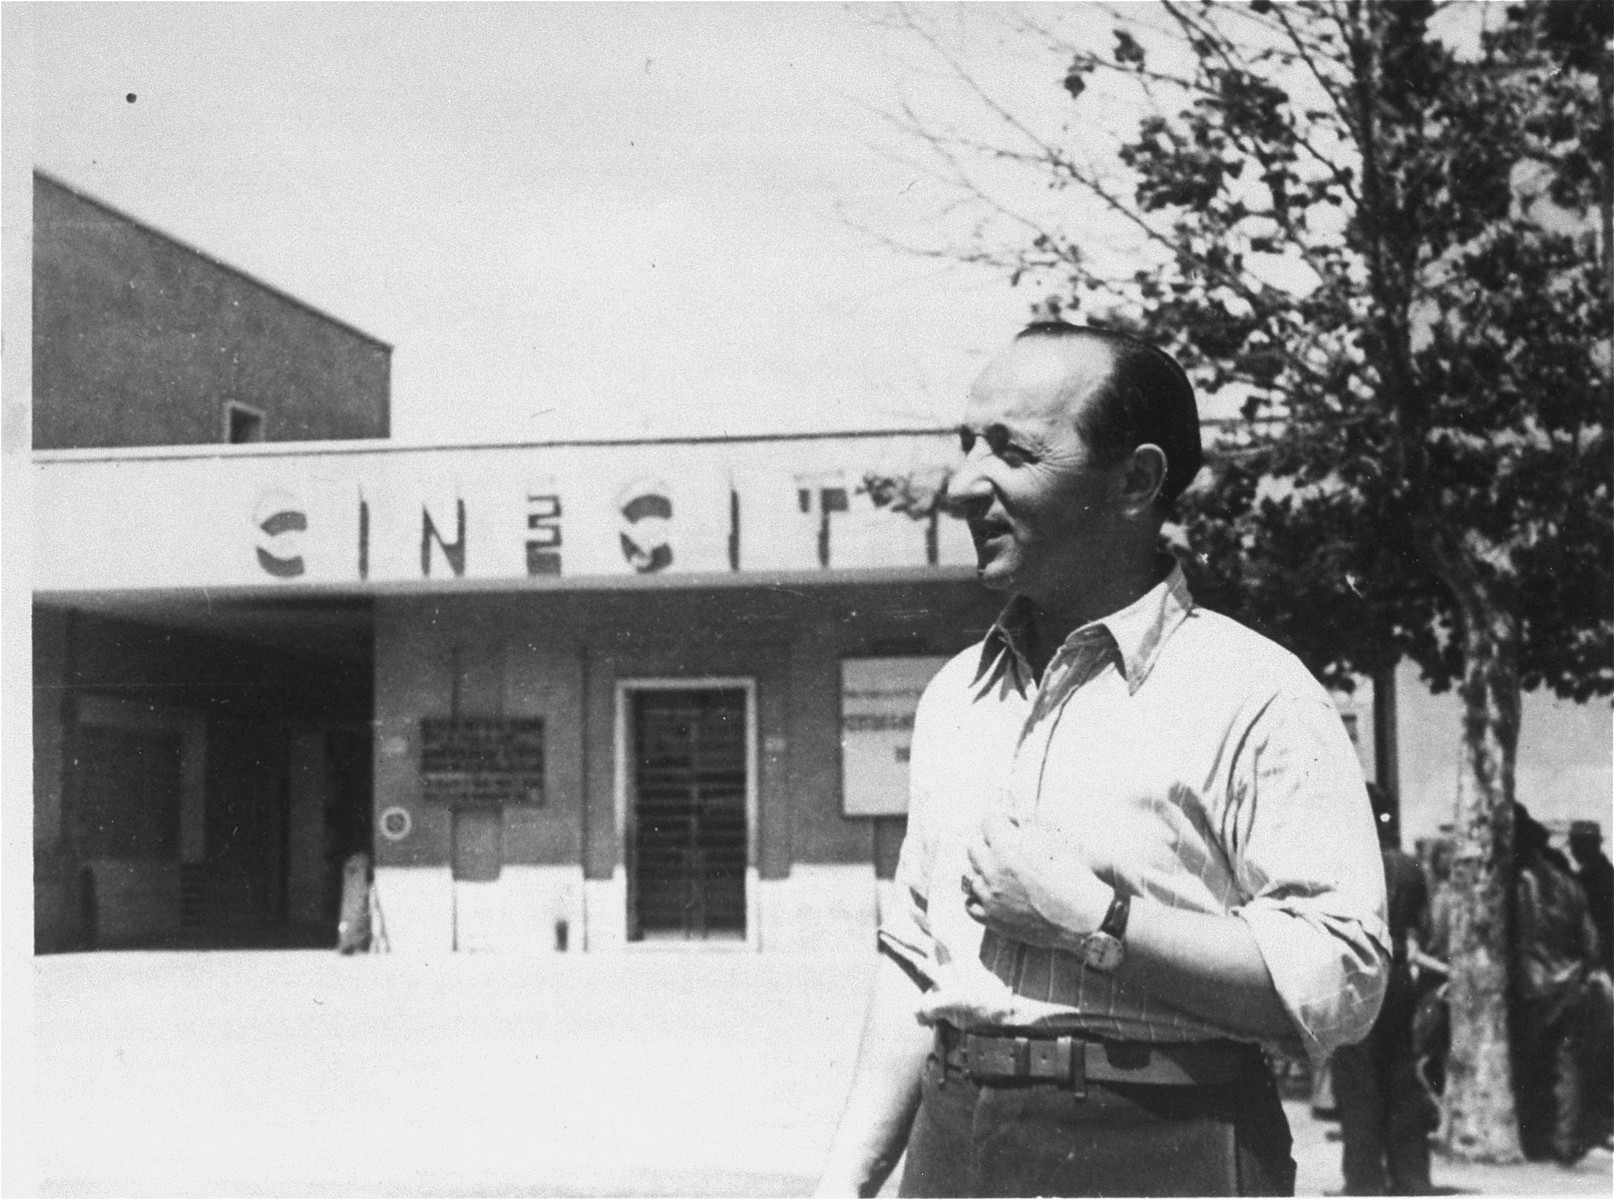 A Jewish DP poses at the entrance to the Cinecitta displaced persons camp in Rome.

Pictured is Edward Arzt.